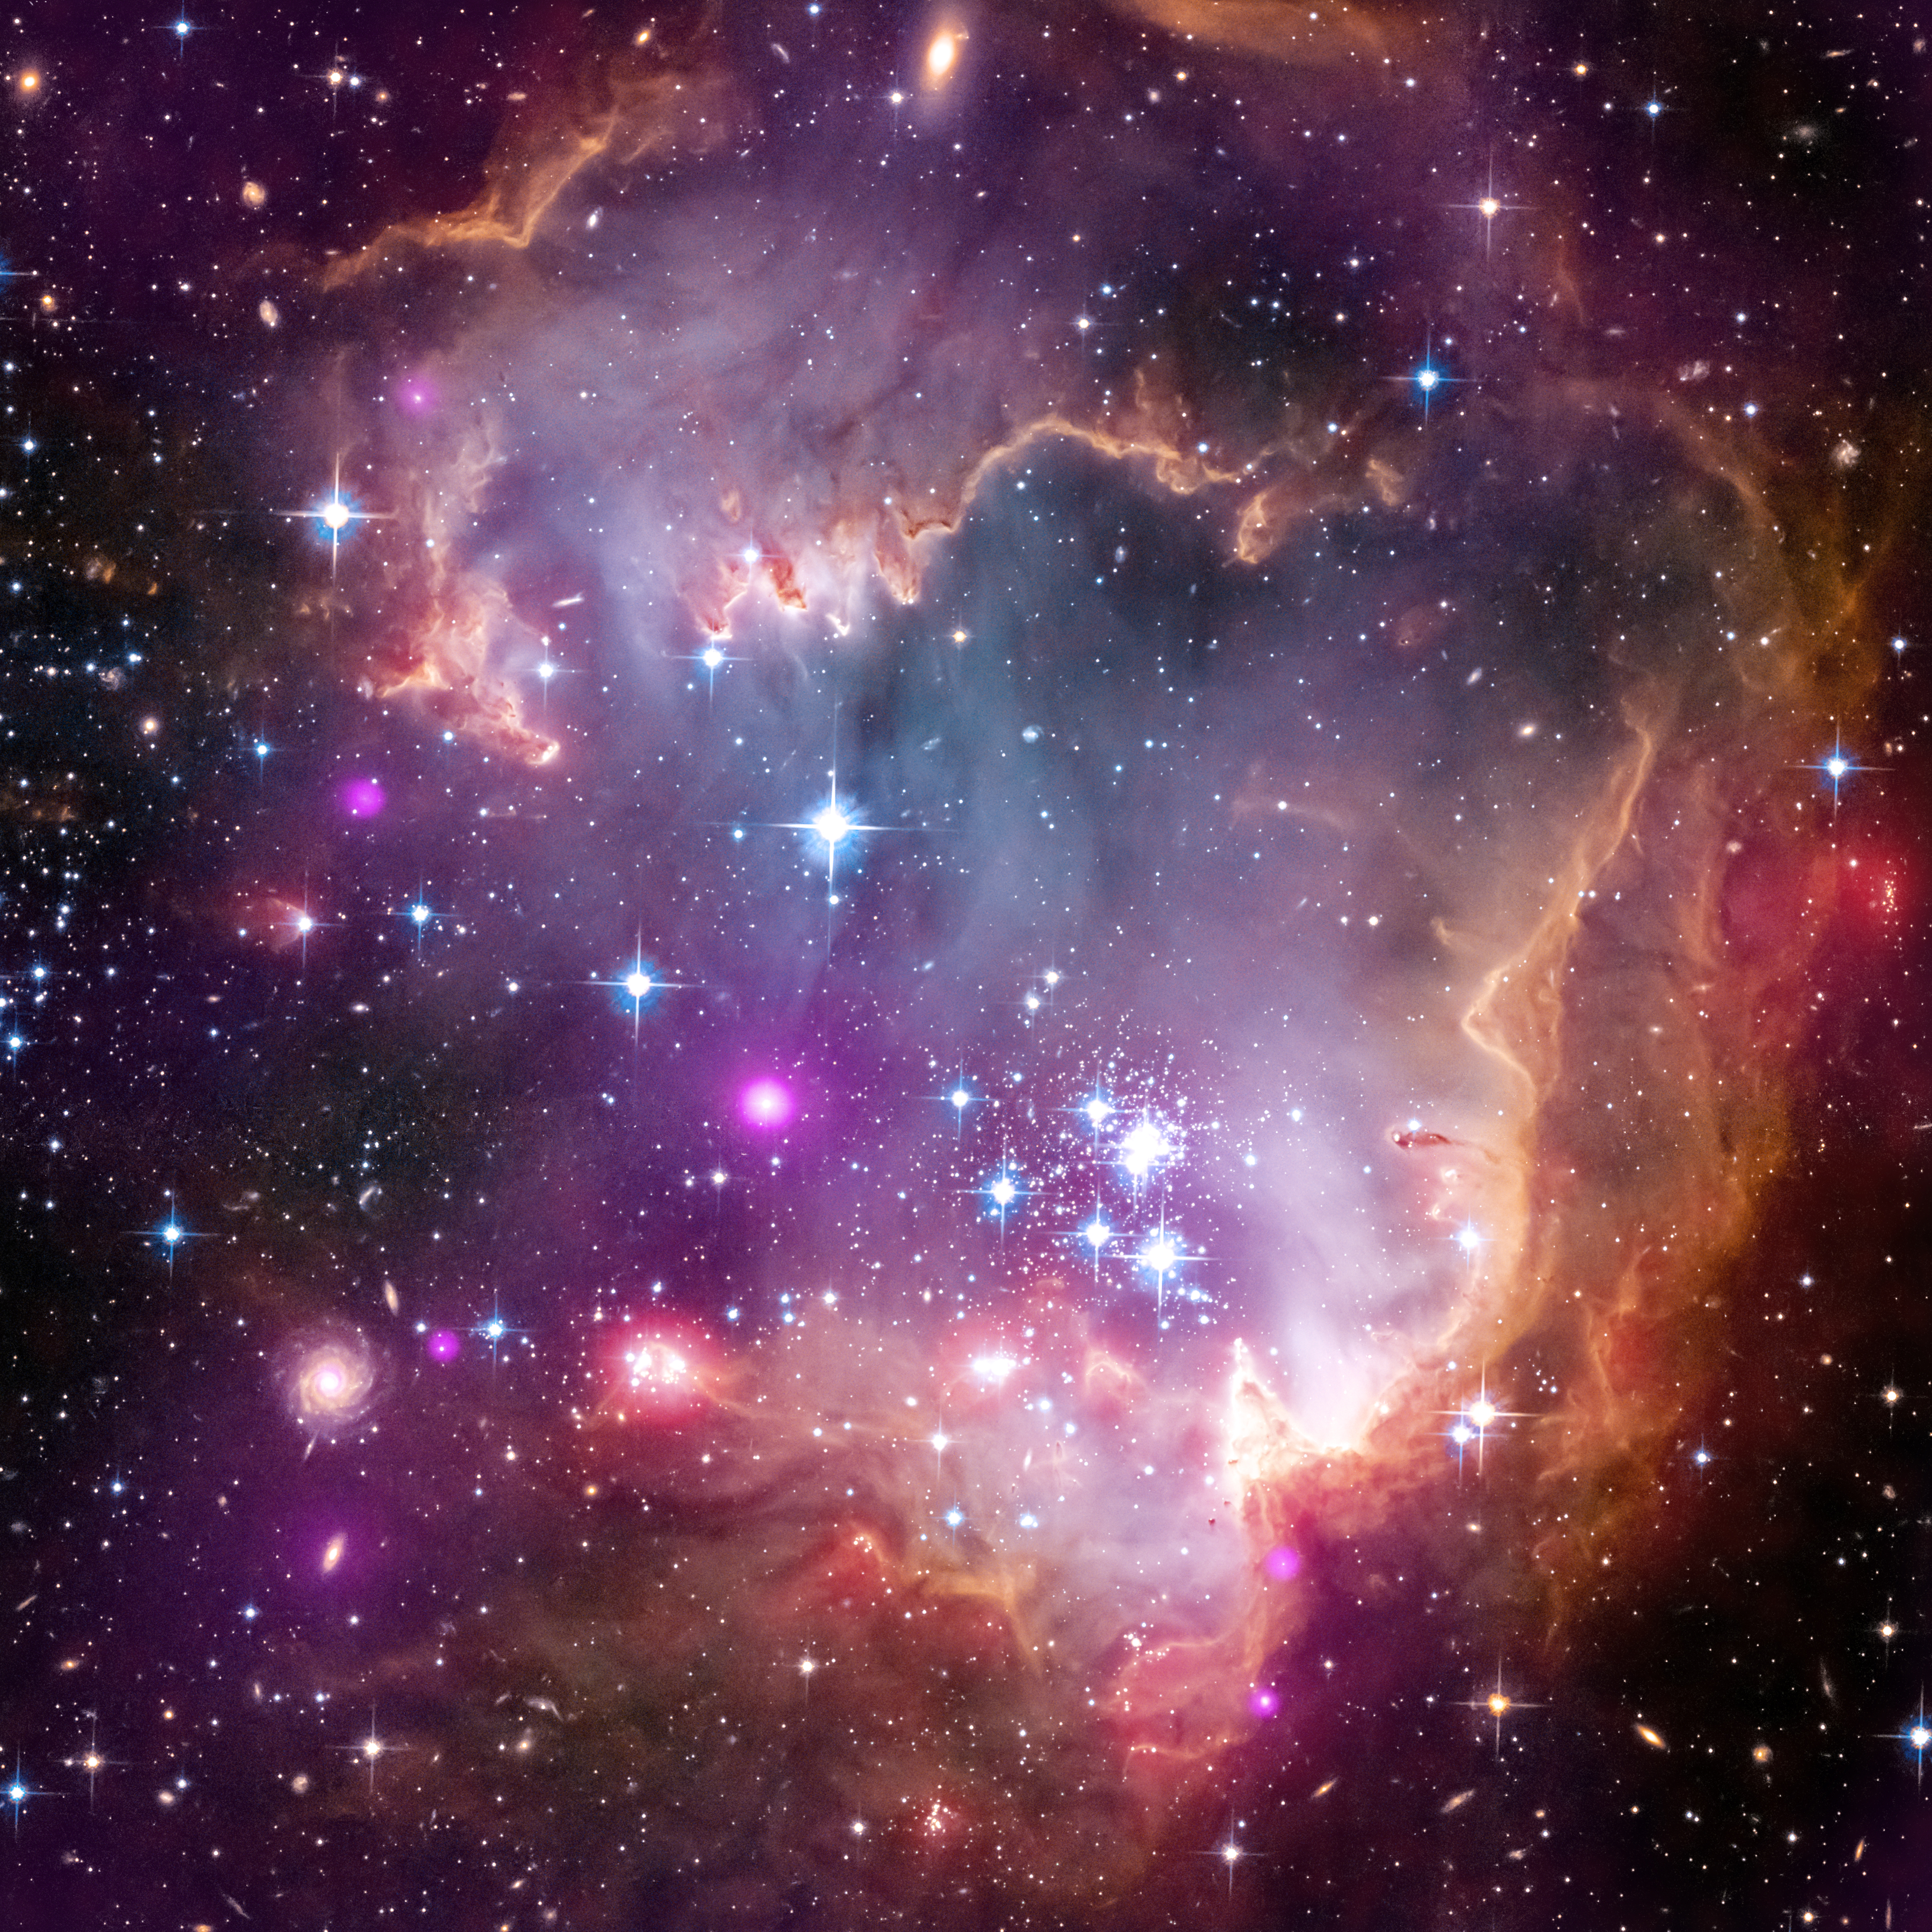 Taken Under the ‘Wing’ of the Small Magellanic Cloud